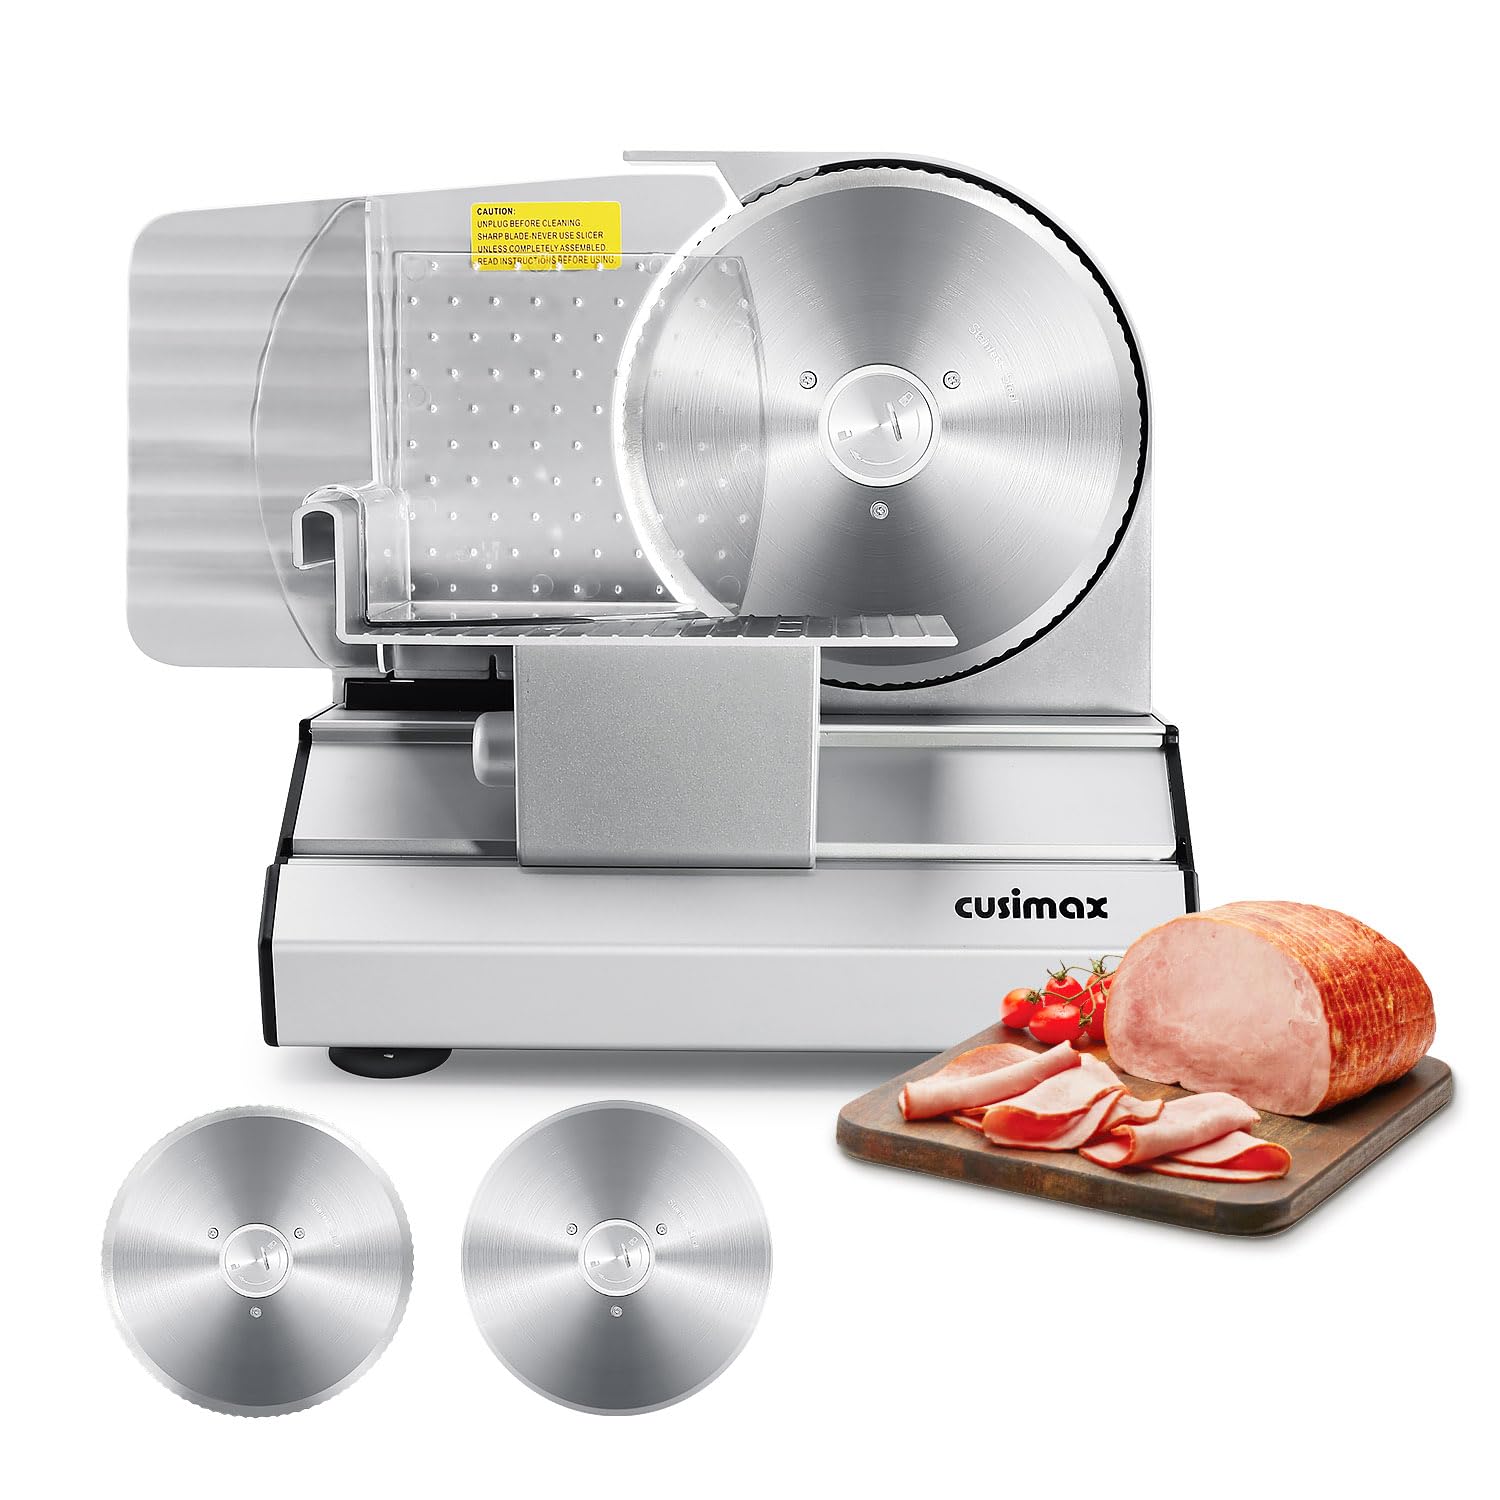 Deli Meat Slicer, 7.5 Blade, Stainless Steel - Professional Series